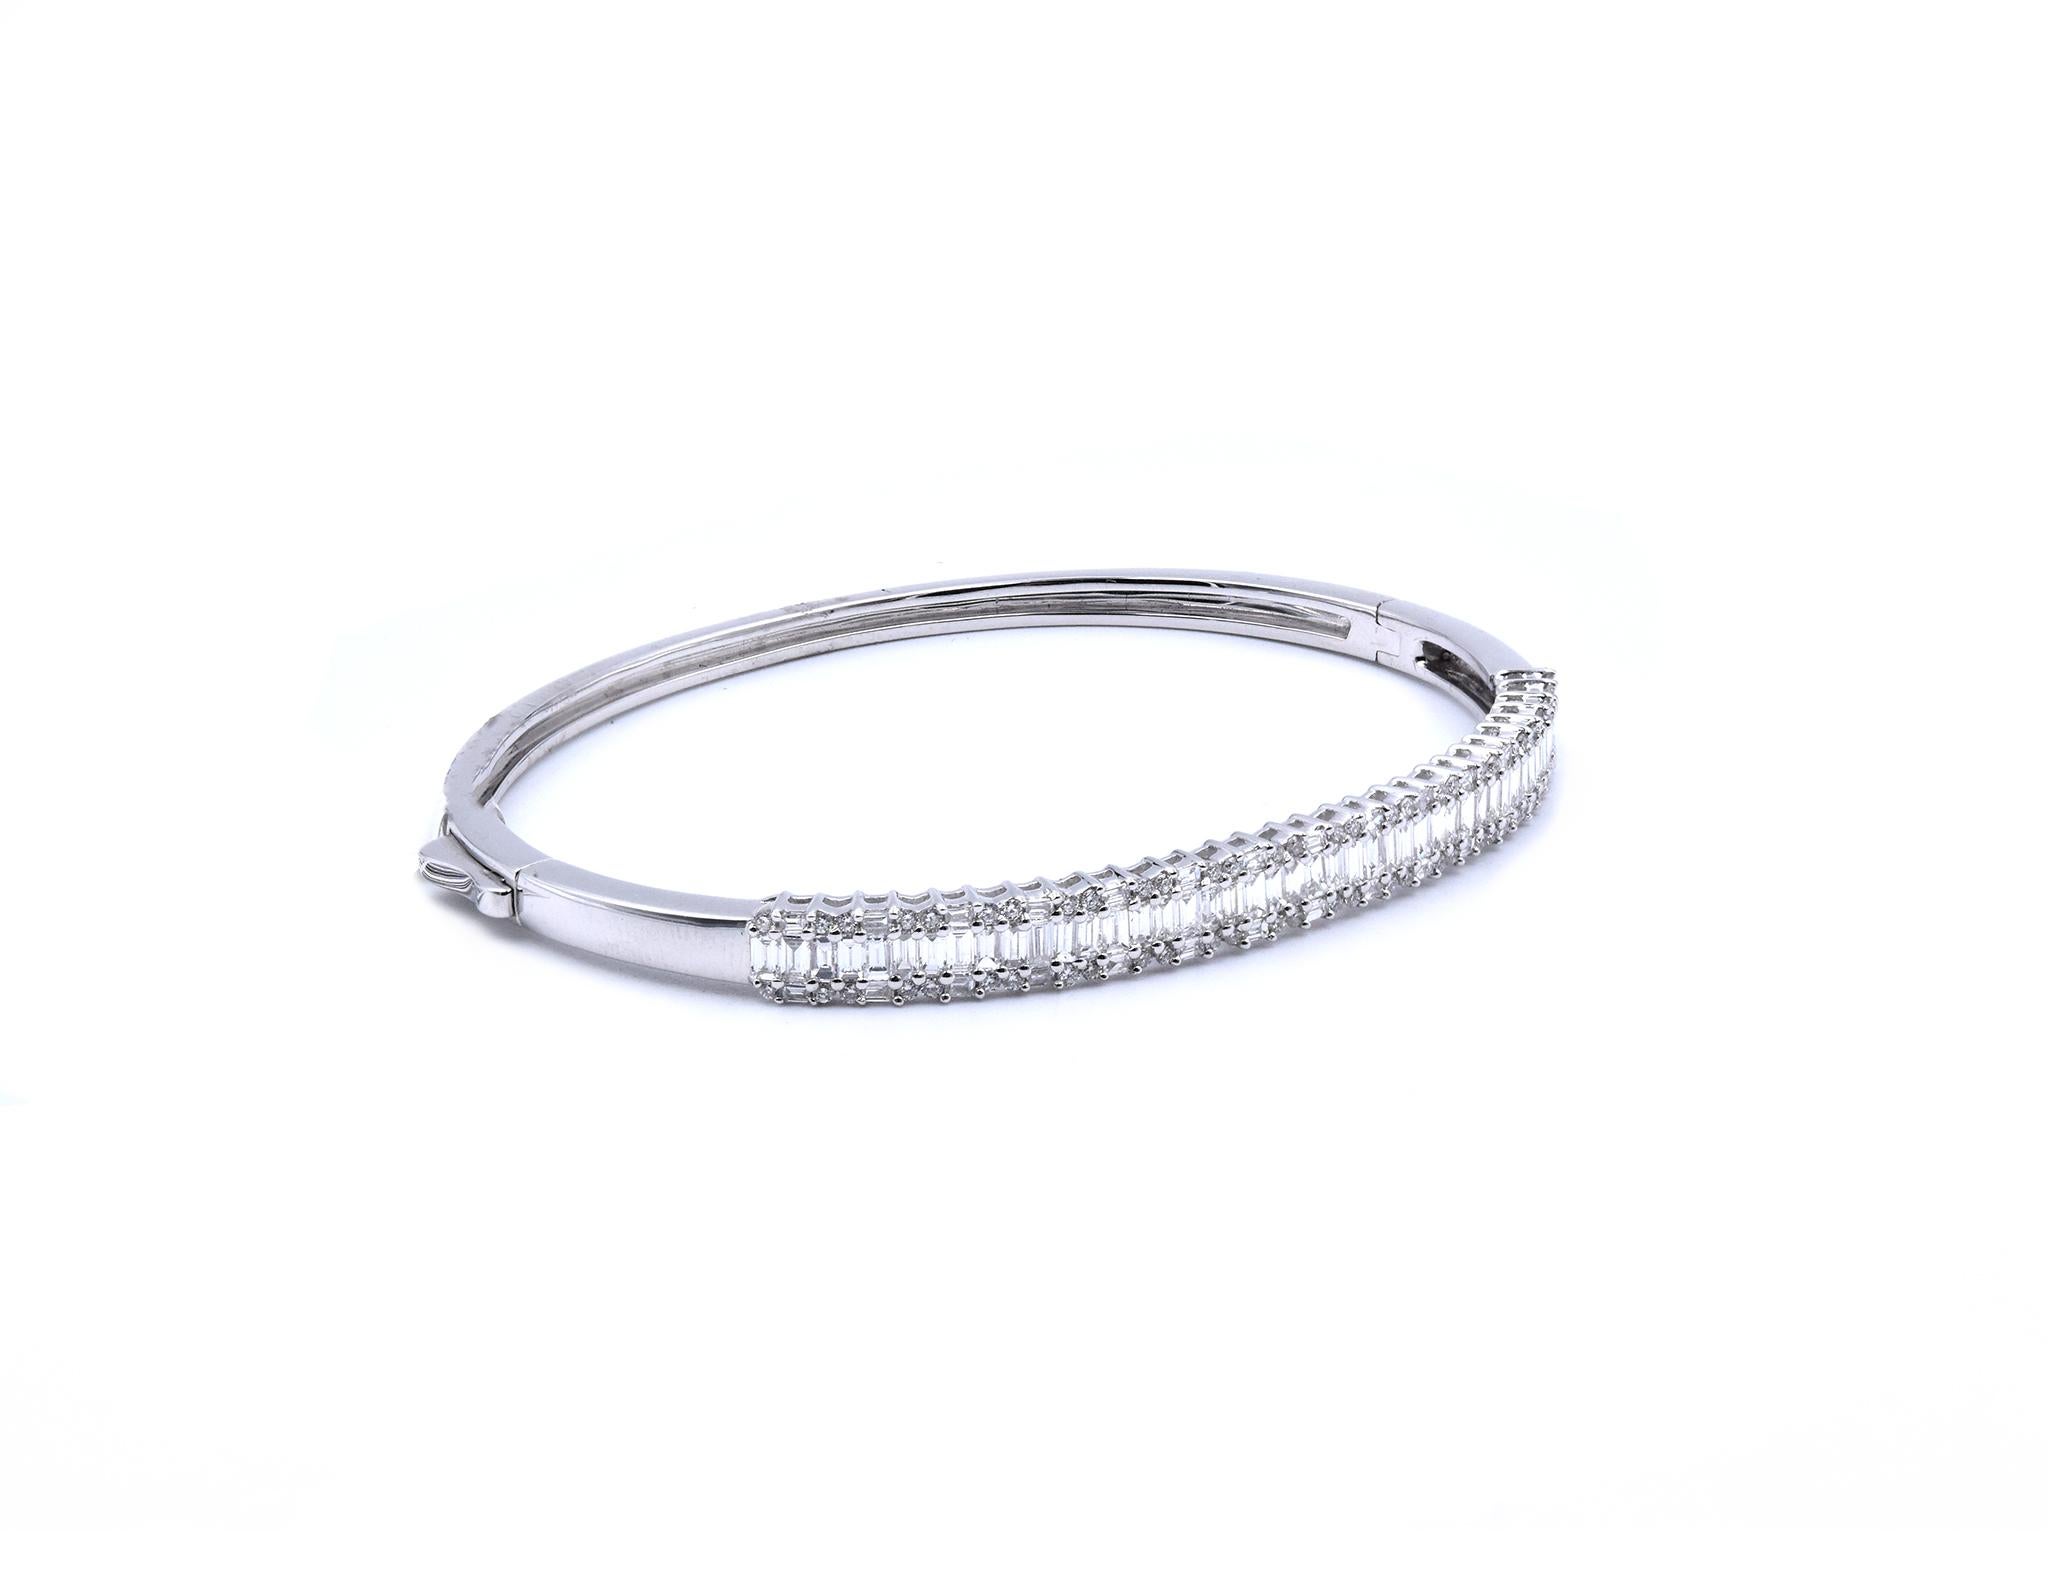 Material: 18K white gold
Diamonds: 135 round and baguette cut = 2.60cttw
Color: G
Clarity: VS1
Dimensions: bracelet will fit up to a 6.5-inch wrist
Weight: 12.91 grams
